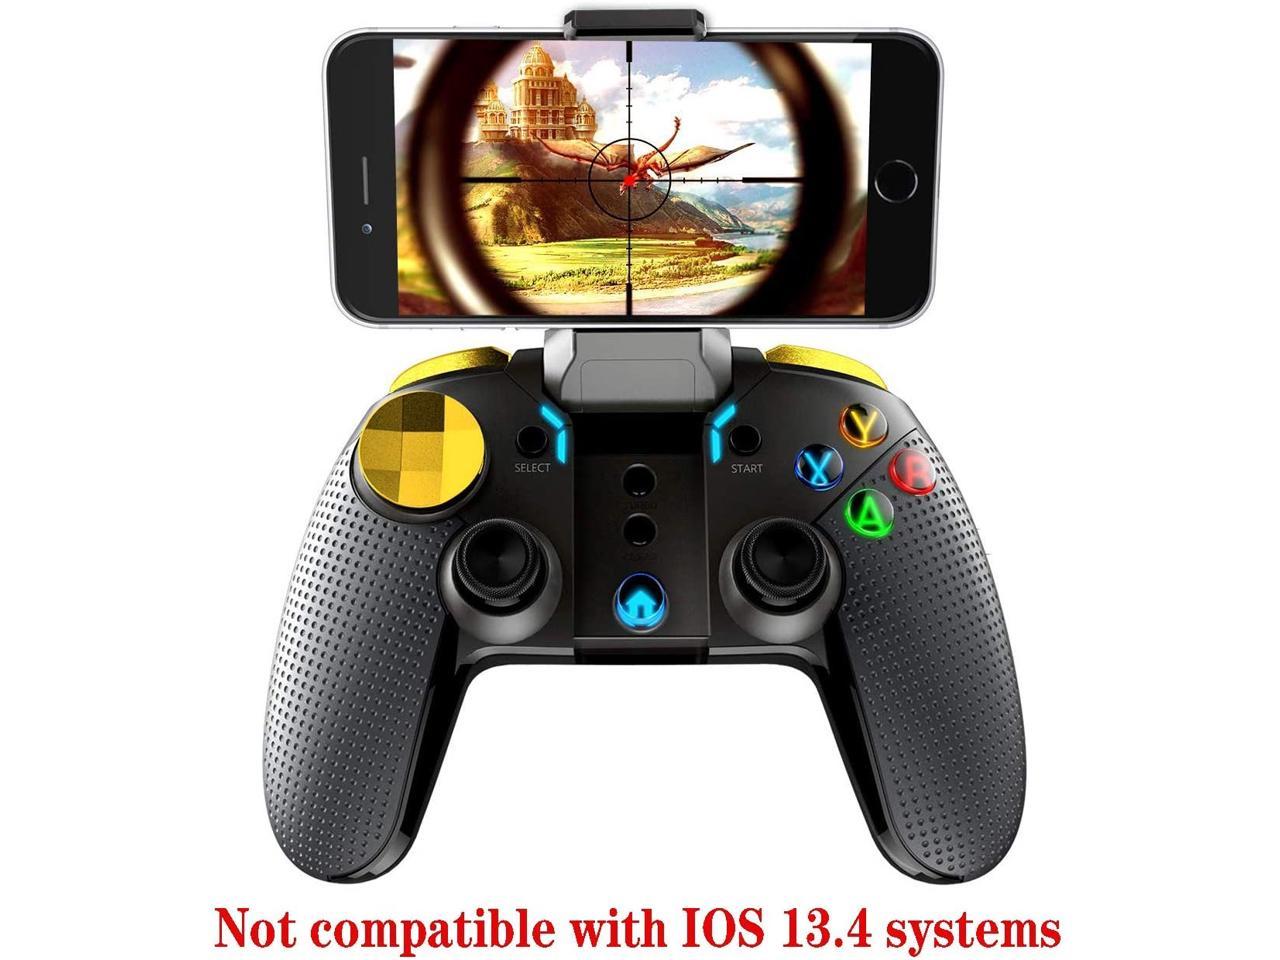 lamp Dubbelzinnig buffet iPEGA-PG-9118 Wireless Gamepad Joystick Multimedia Game Controller  Compatible Android Device Phone8/XR/XS Compatible Samsung Galaxy S9/S9+  S10/S10+ VIVO X27 Android Tablet PC - Newegg.com